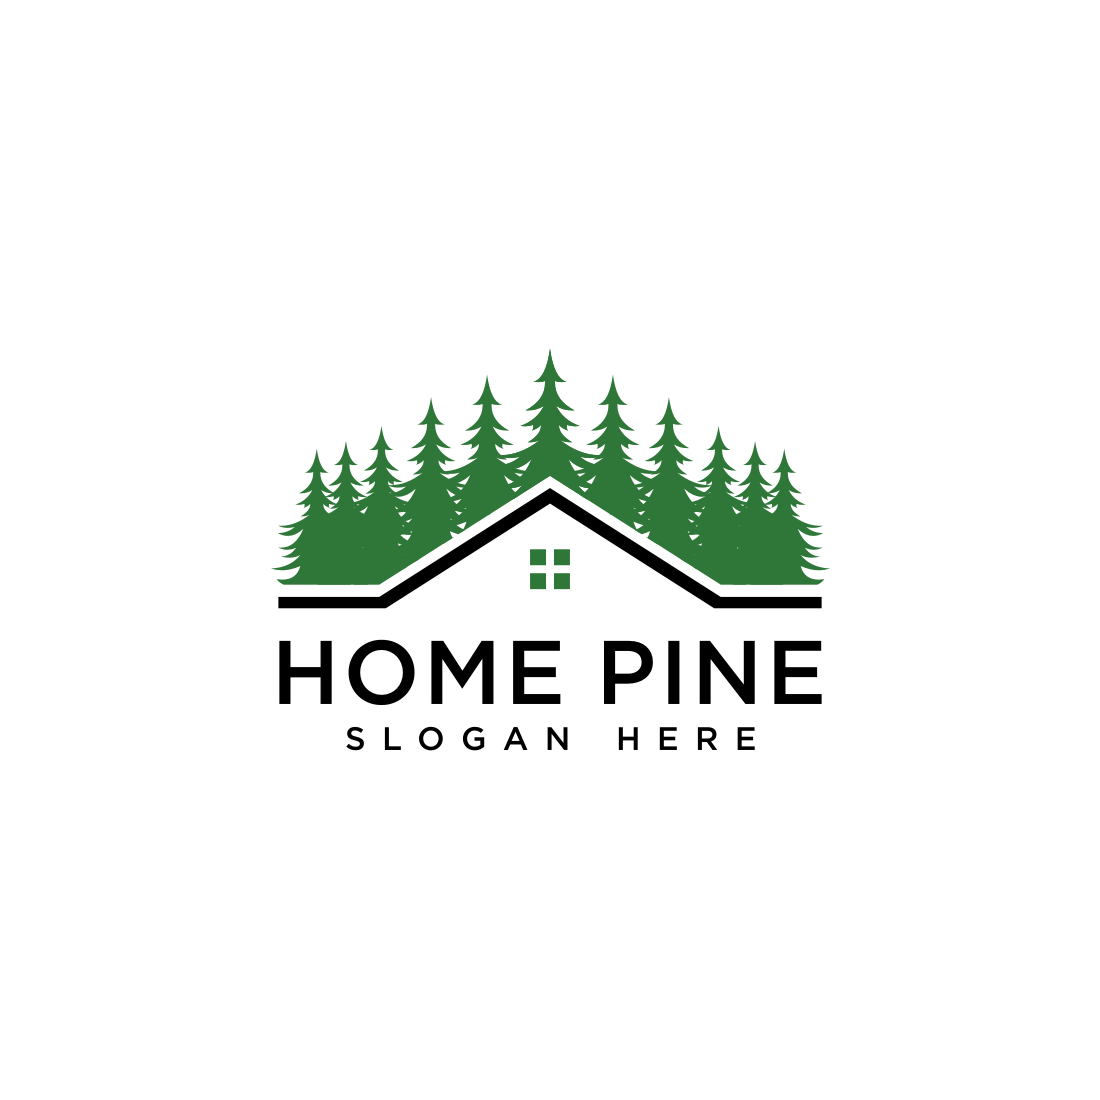 Home and Pine Tree Logo Vector Design cover image.